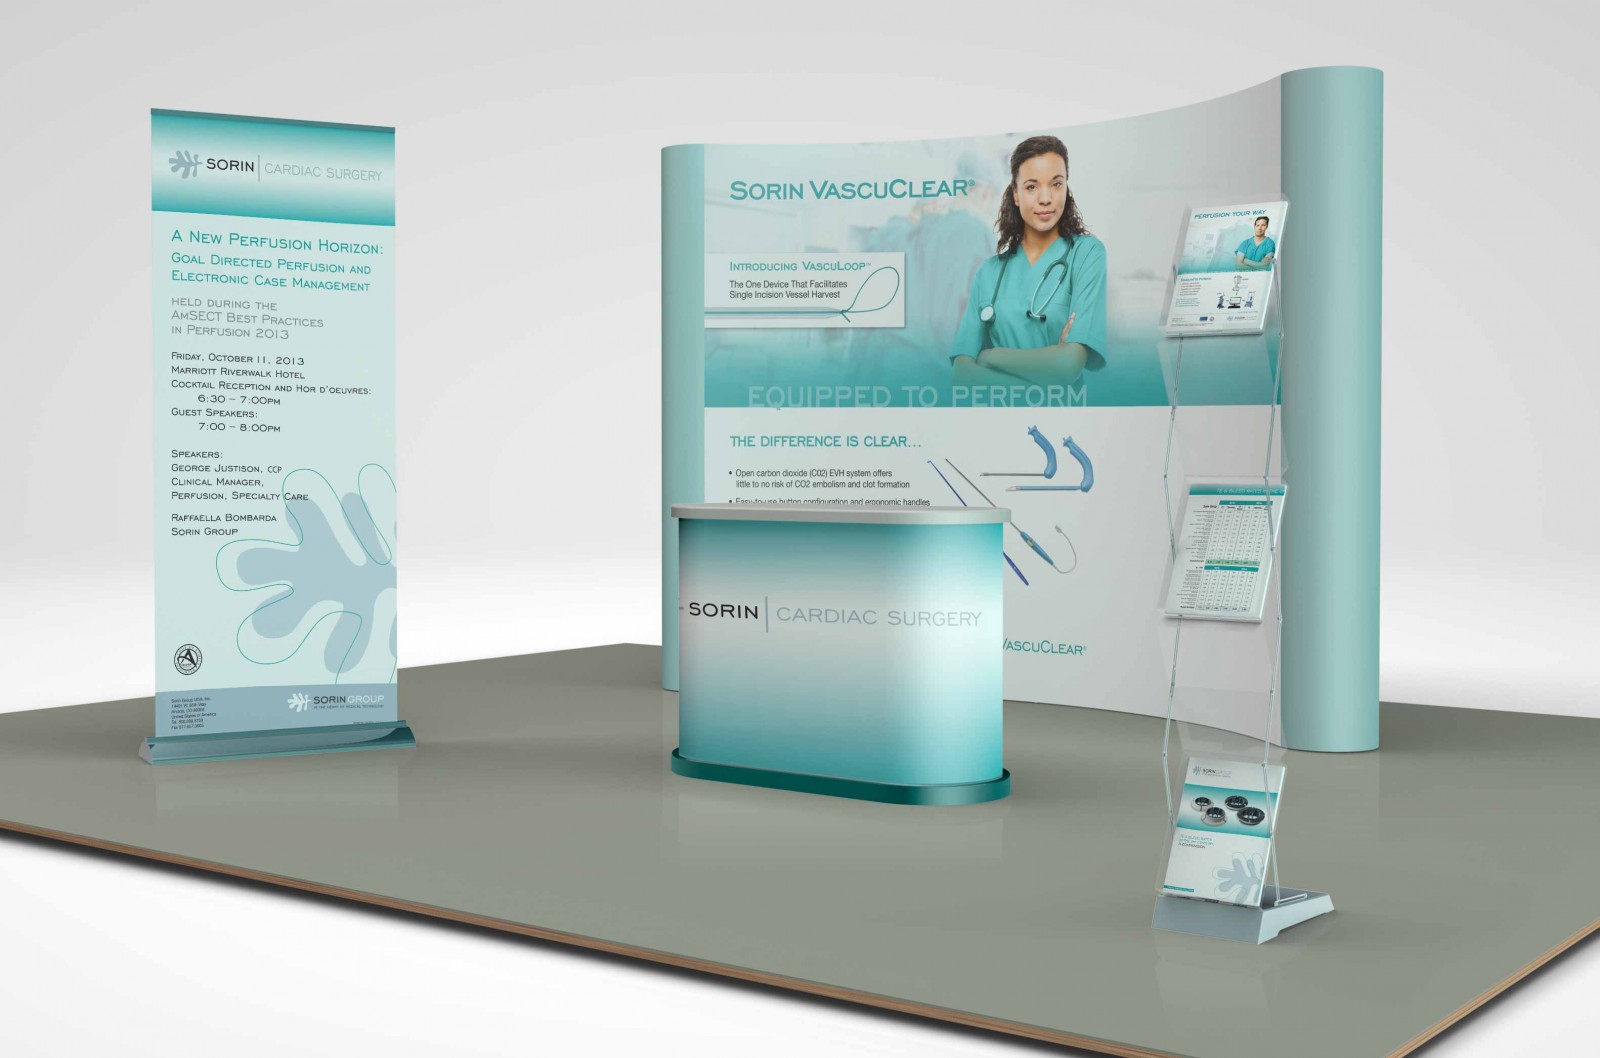 Sorin trade show exhibit designed in partnership with ide8 Marketing.